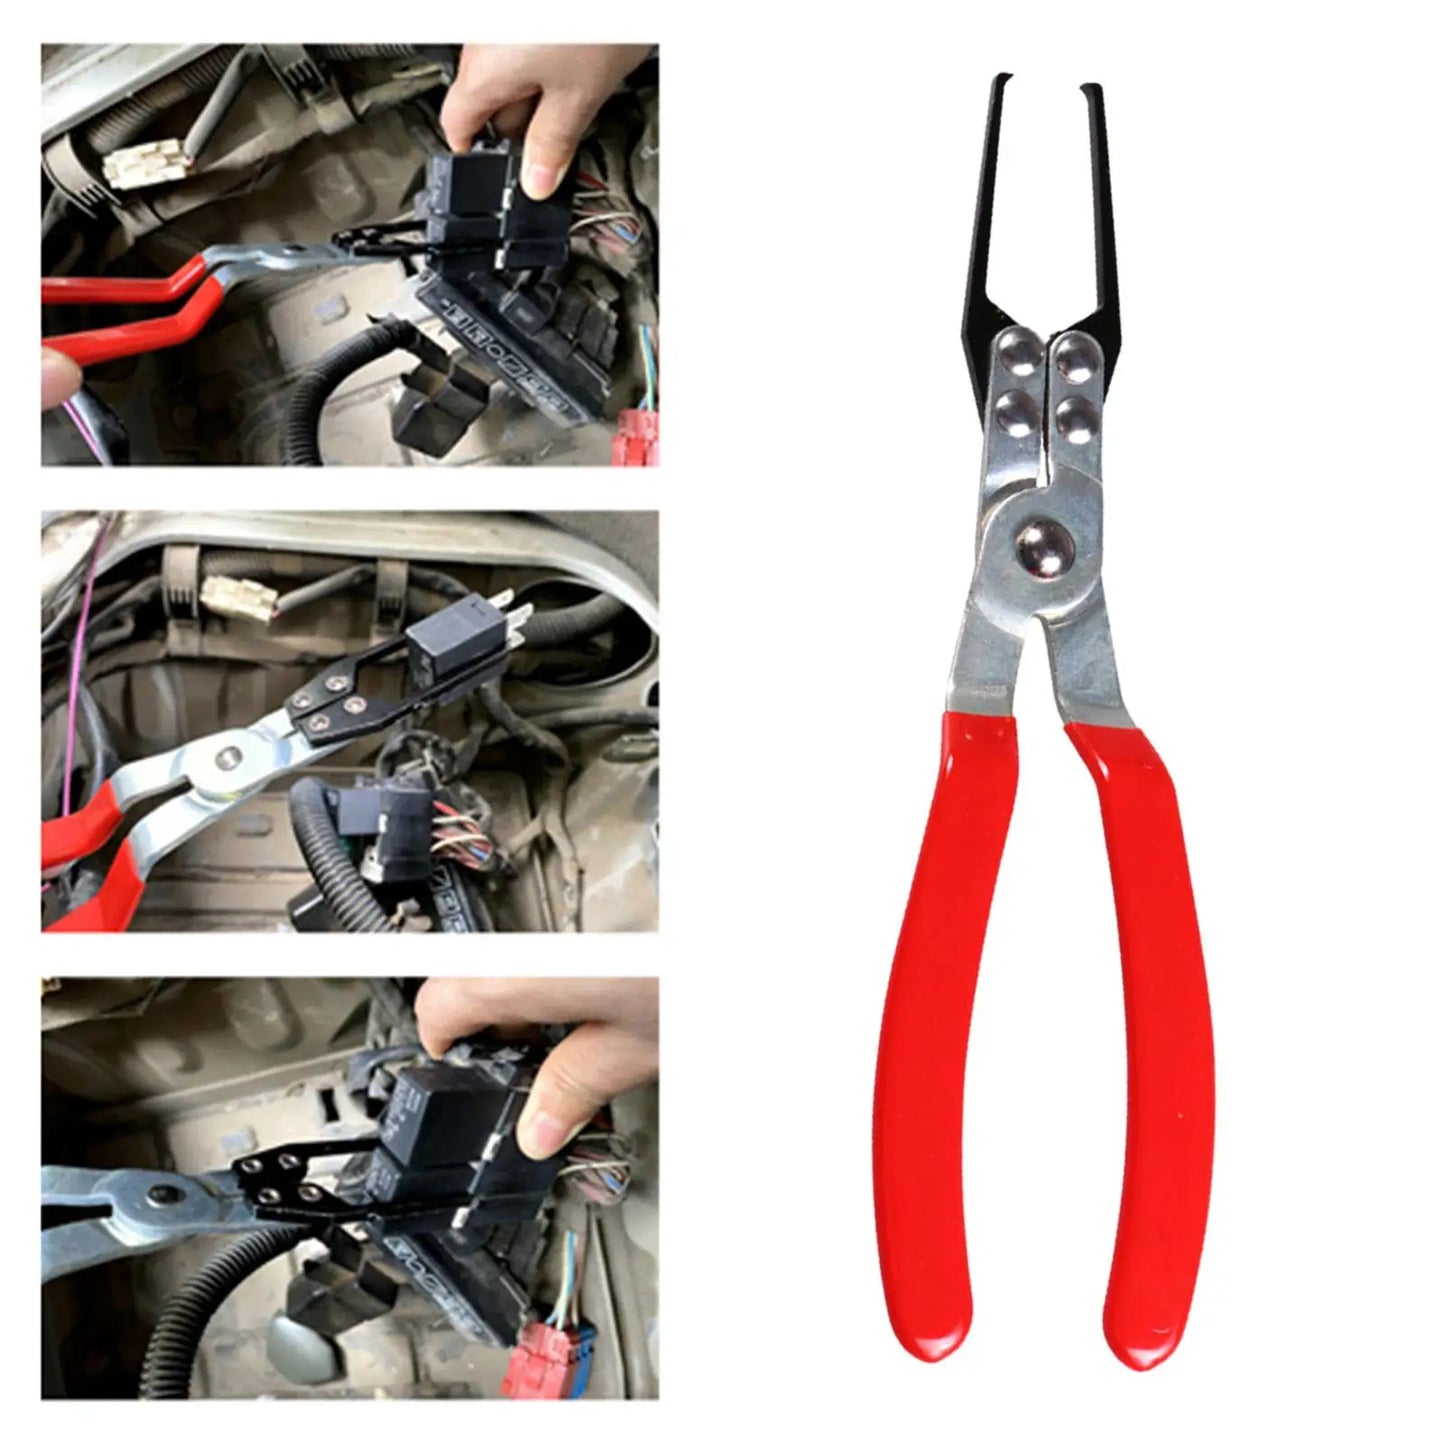 Automotive Fuse and Relay Pliers